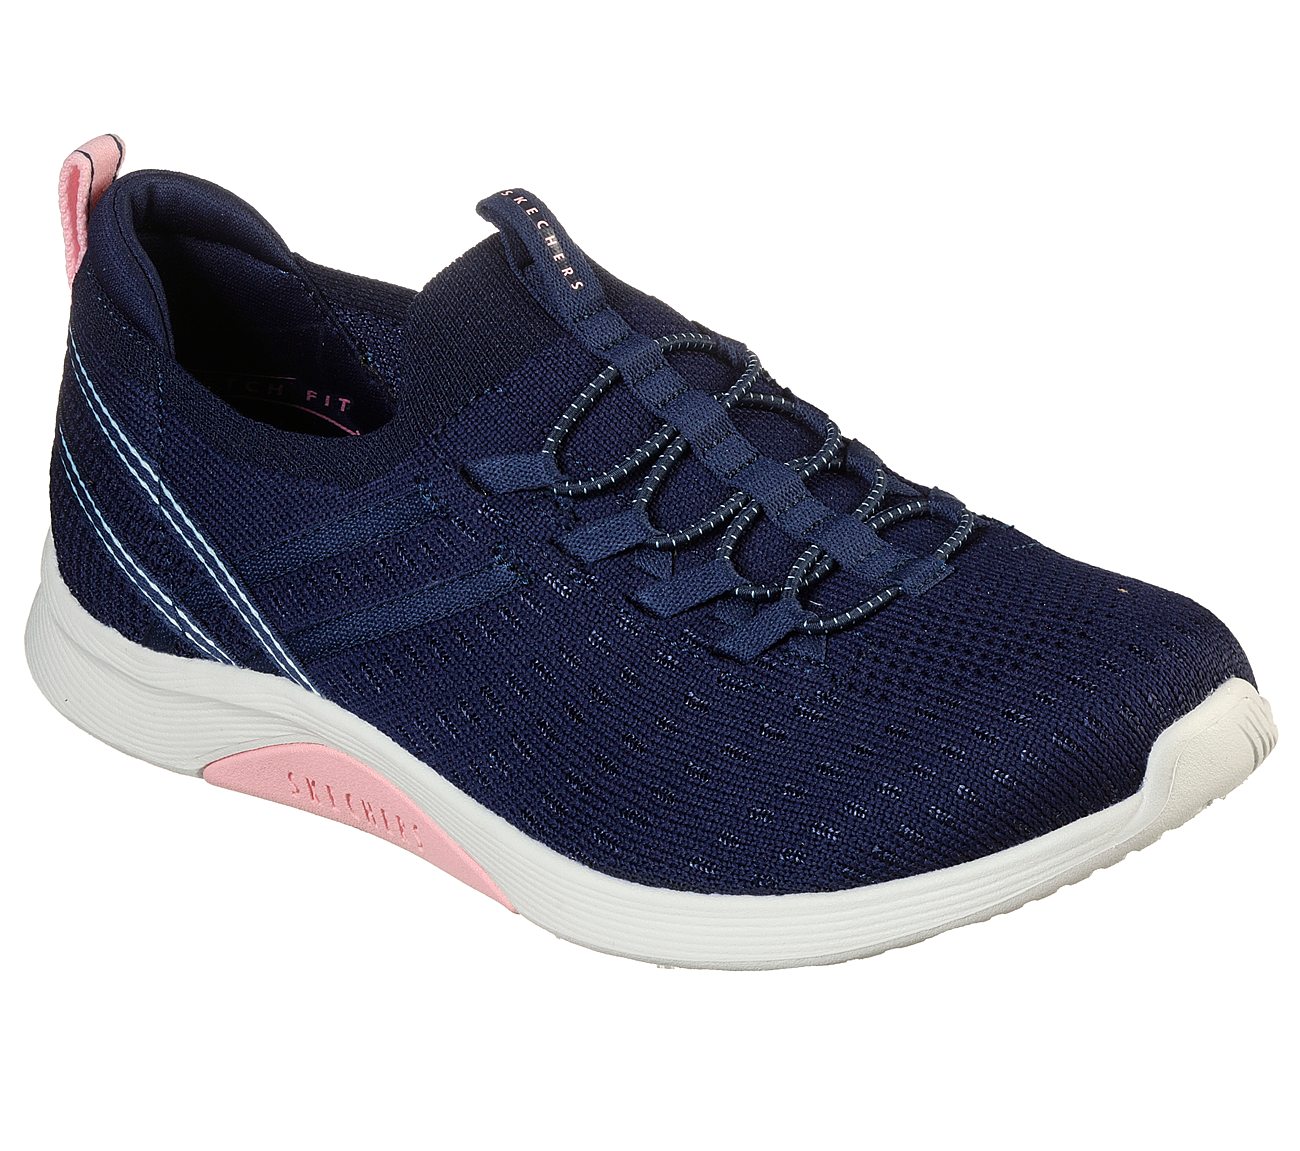 ESLA - EVERY MOVE, NAVY/PINK Footwear Lateral View